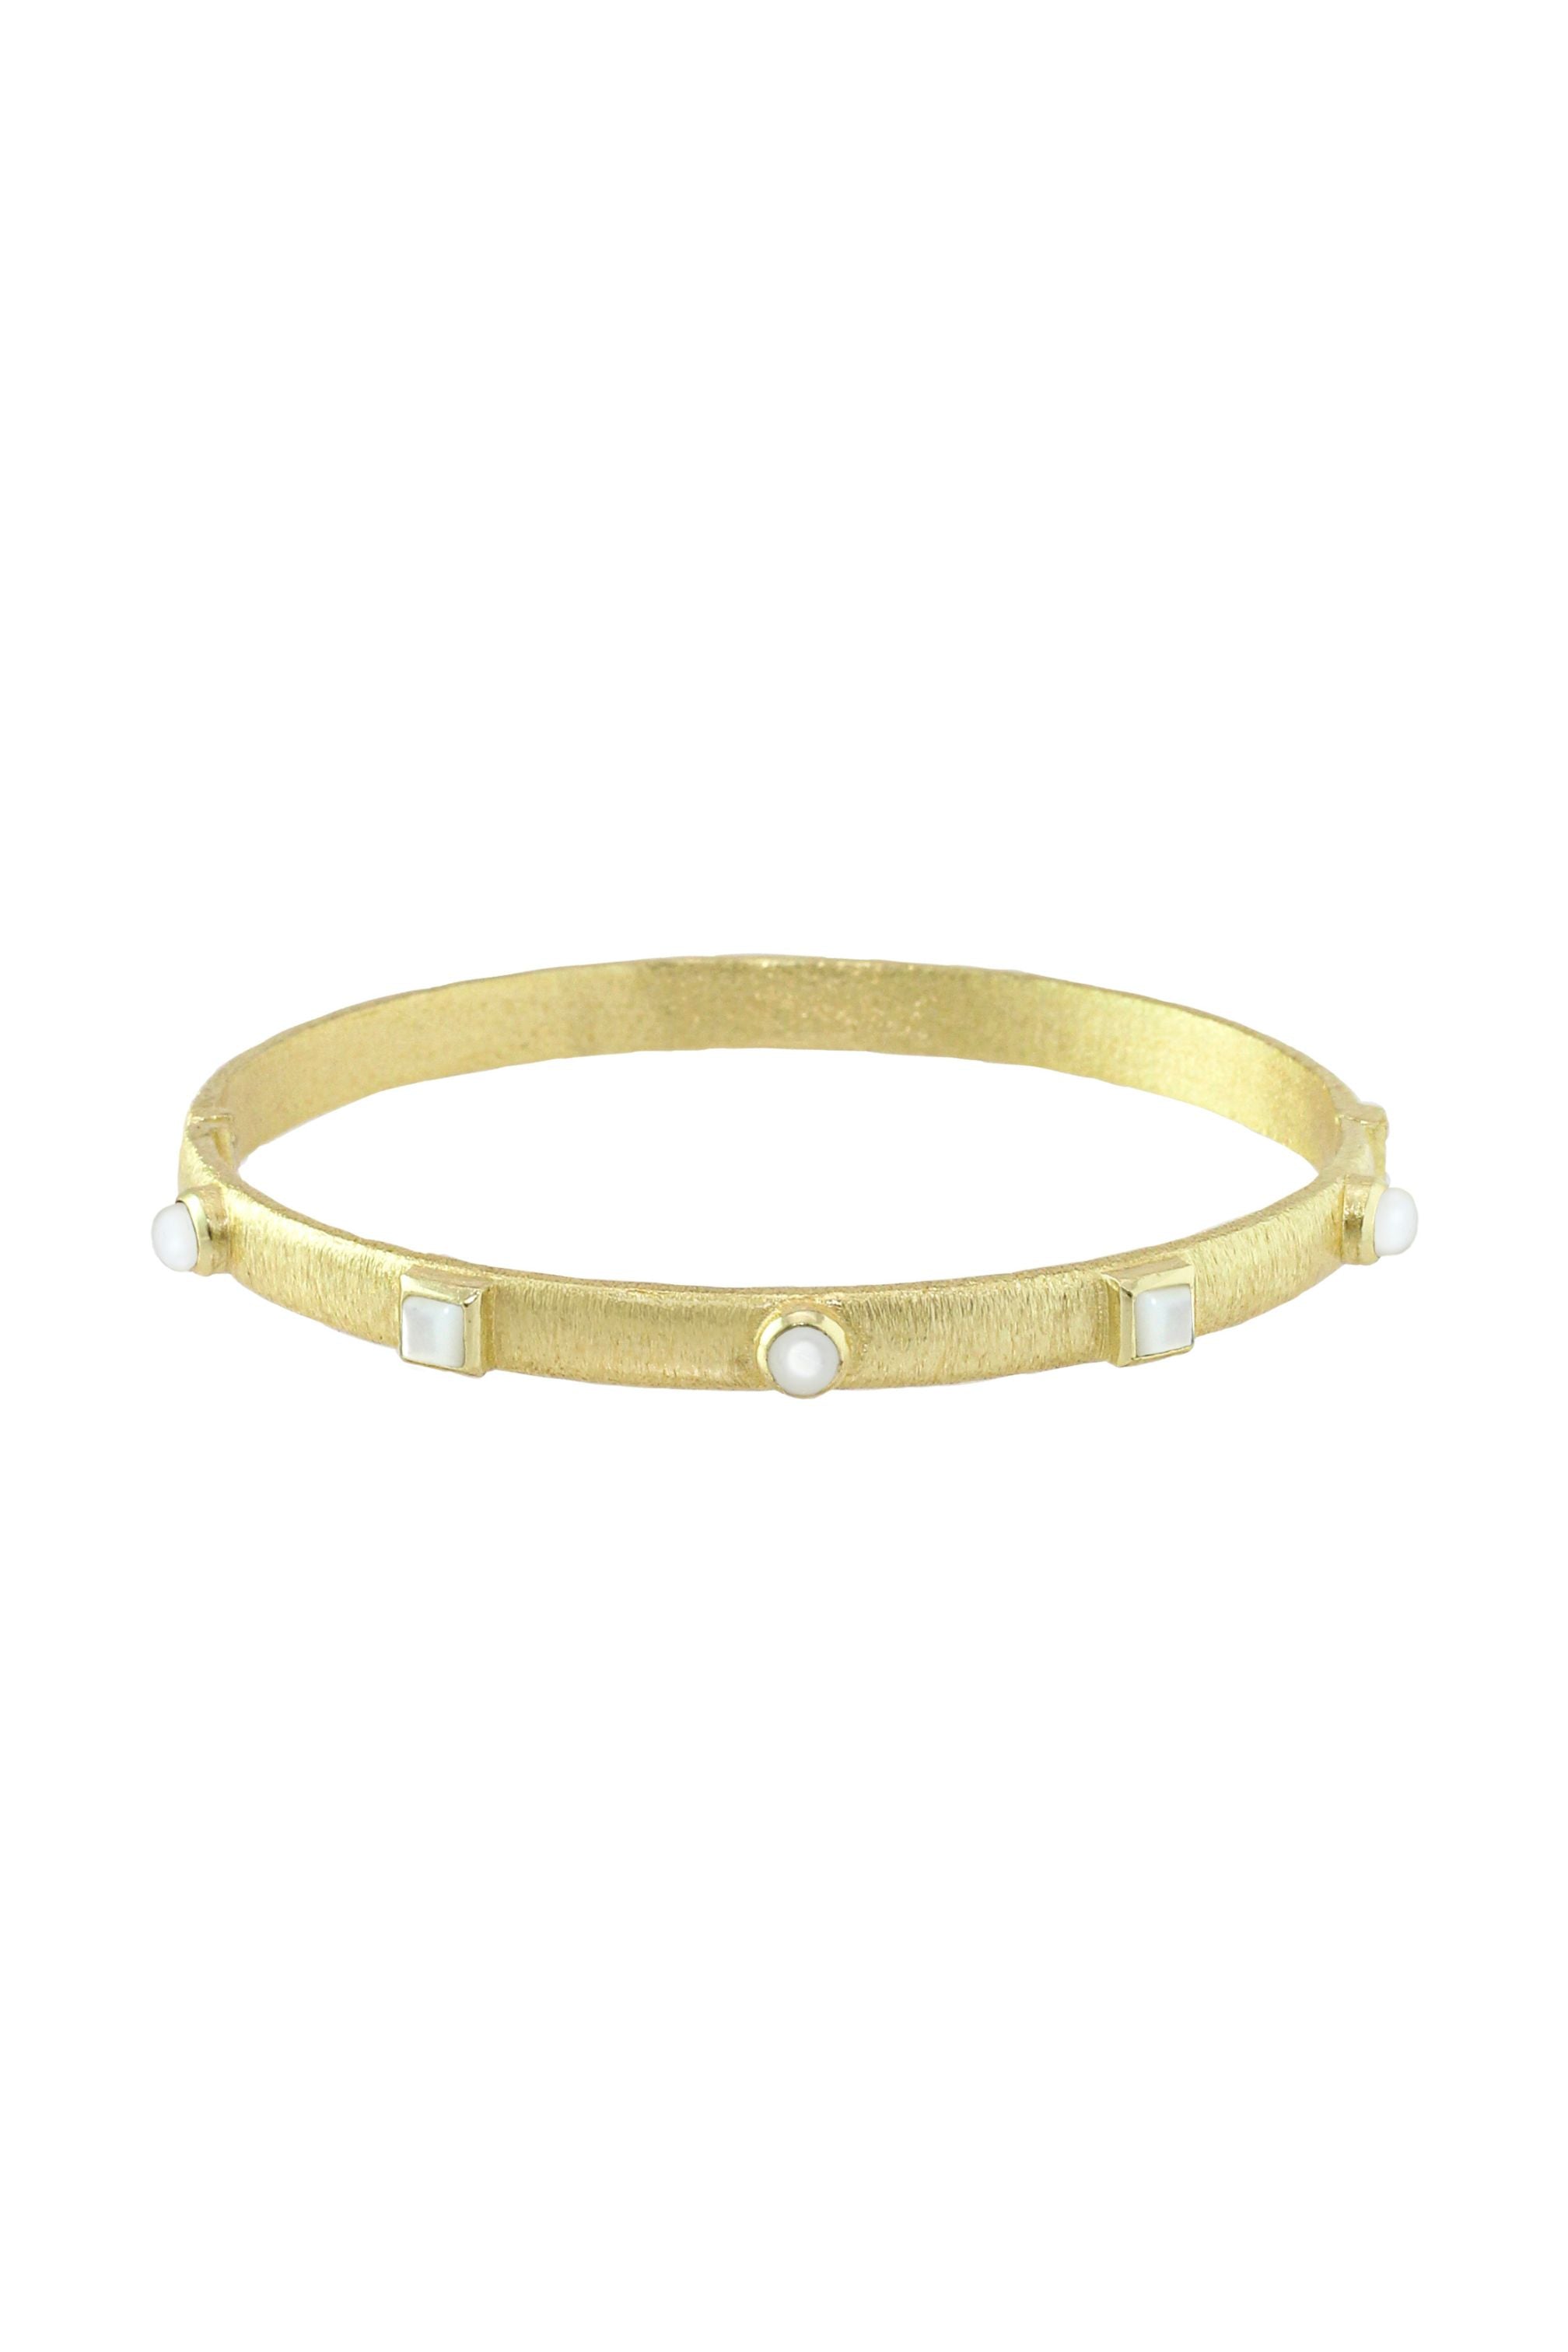 Gold bangle with pearl accents